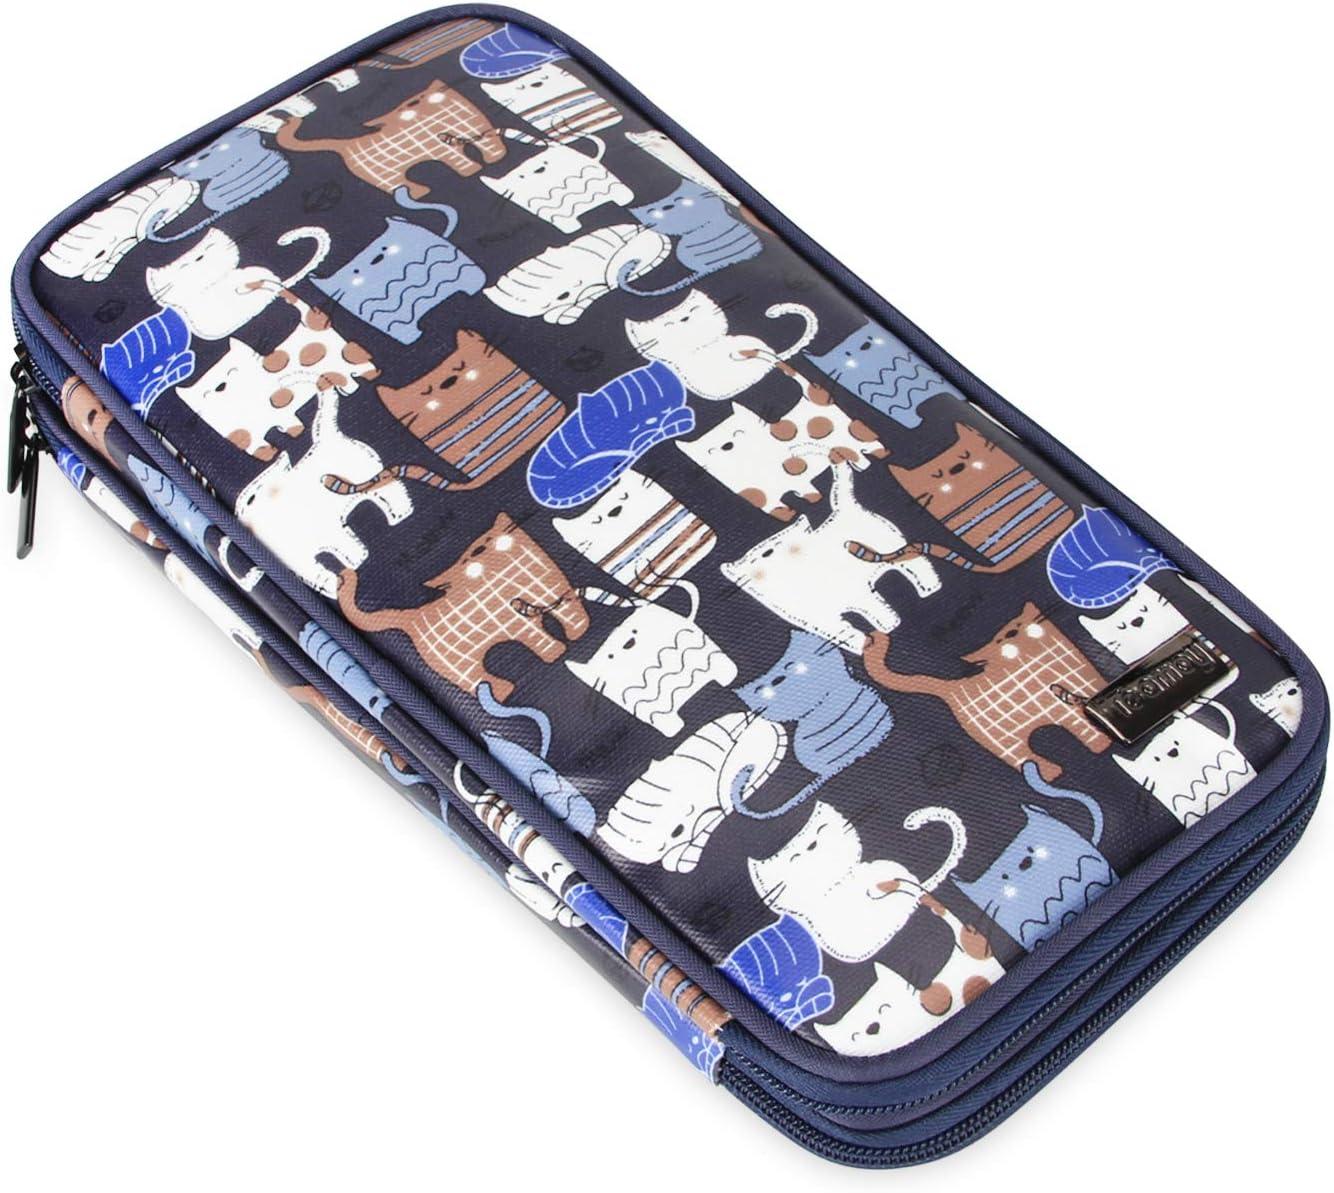 Teamoy Crochet Hook Case Empty, Crochet Hook Organizer with Multiple  Pockets for Crochet Needles and Knitting Accessories, Cats Blue